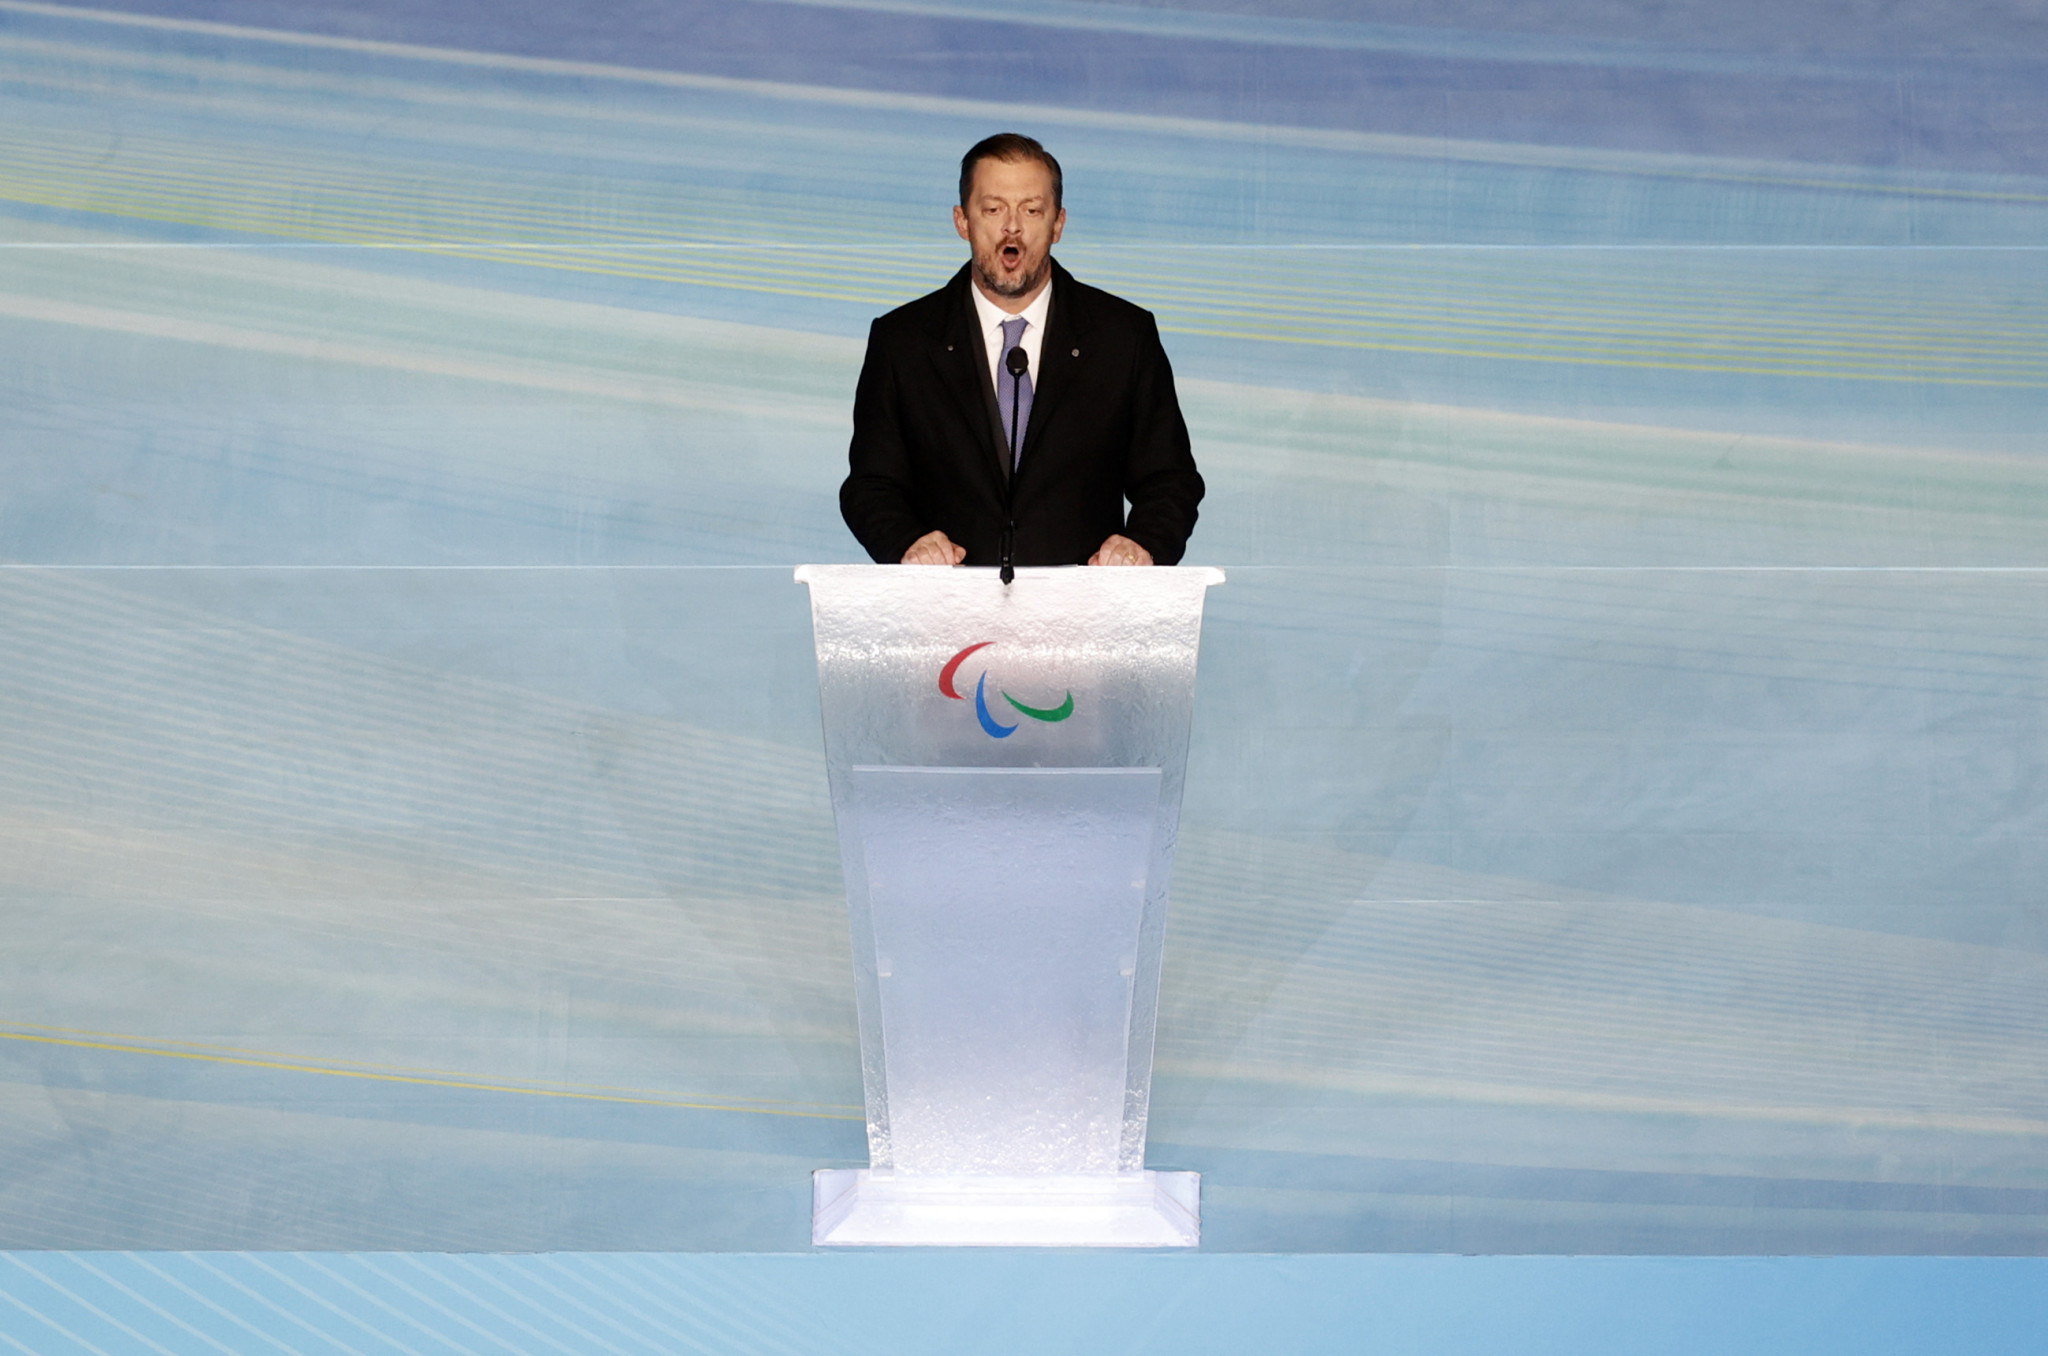 Andrew Parsons wants to use Beijing 2022 to send "a very powerful message of inclusion" ©Getty Images